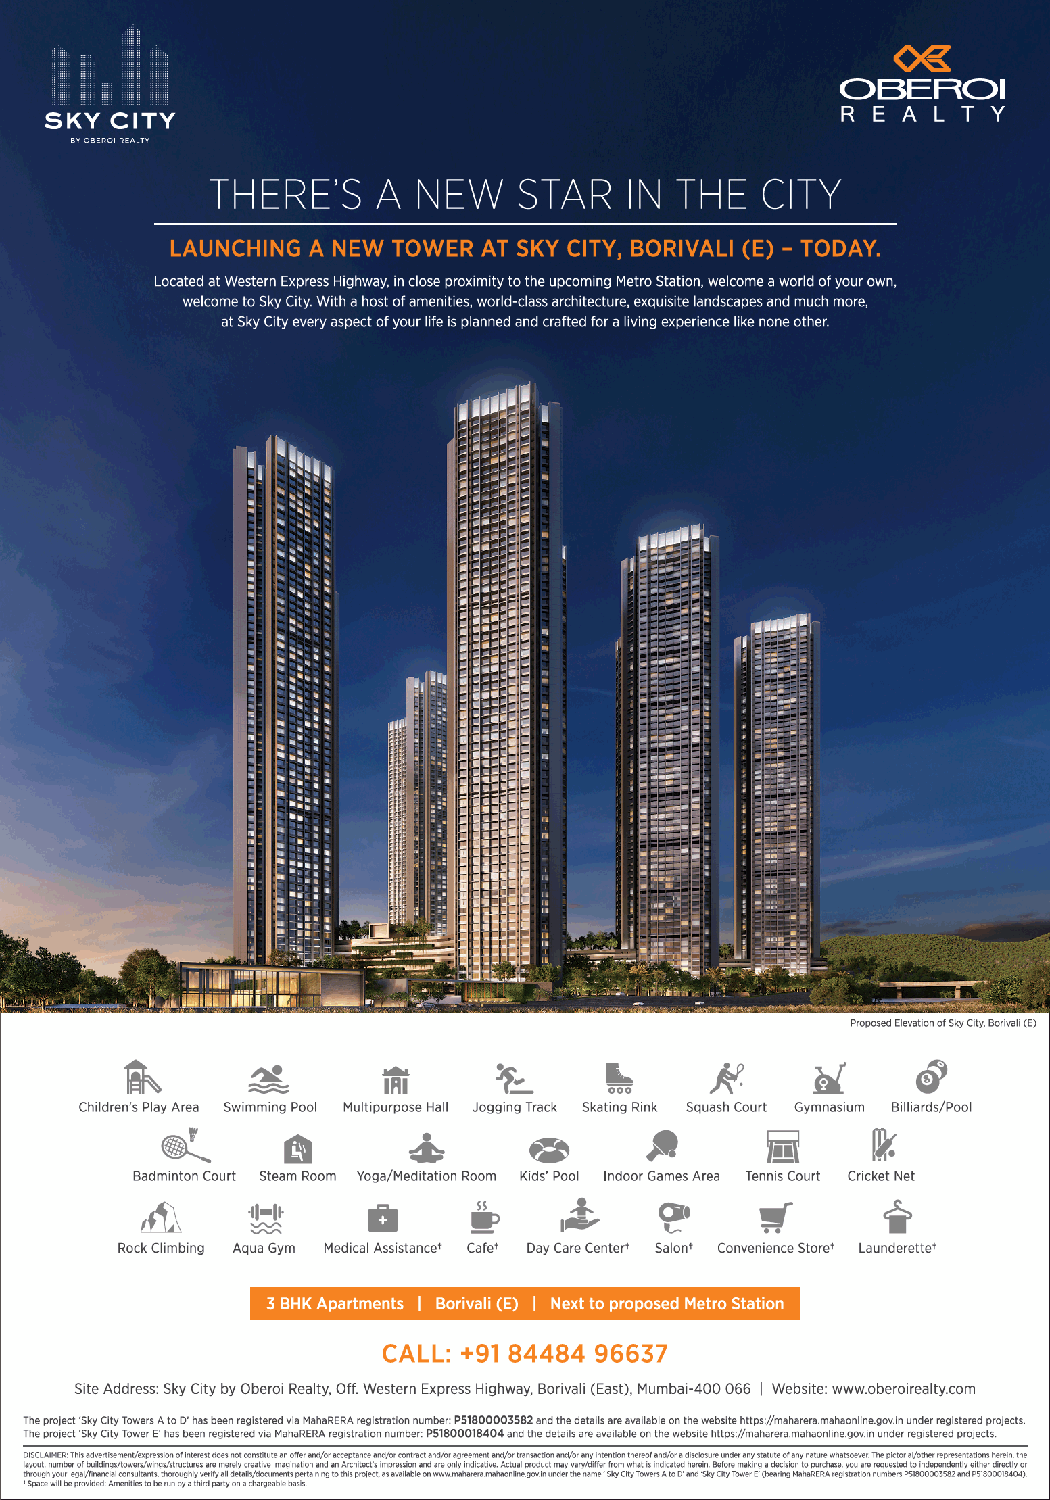 oberoi-realty-sky-city-there-is-a-new-star-in-the-city-ad-in-times-of-india-mumbai-advert-gallery